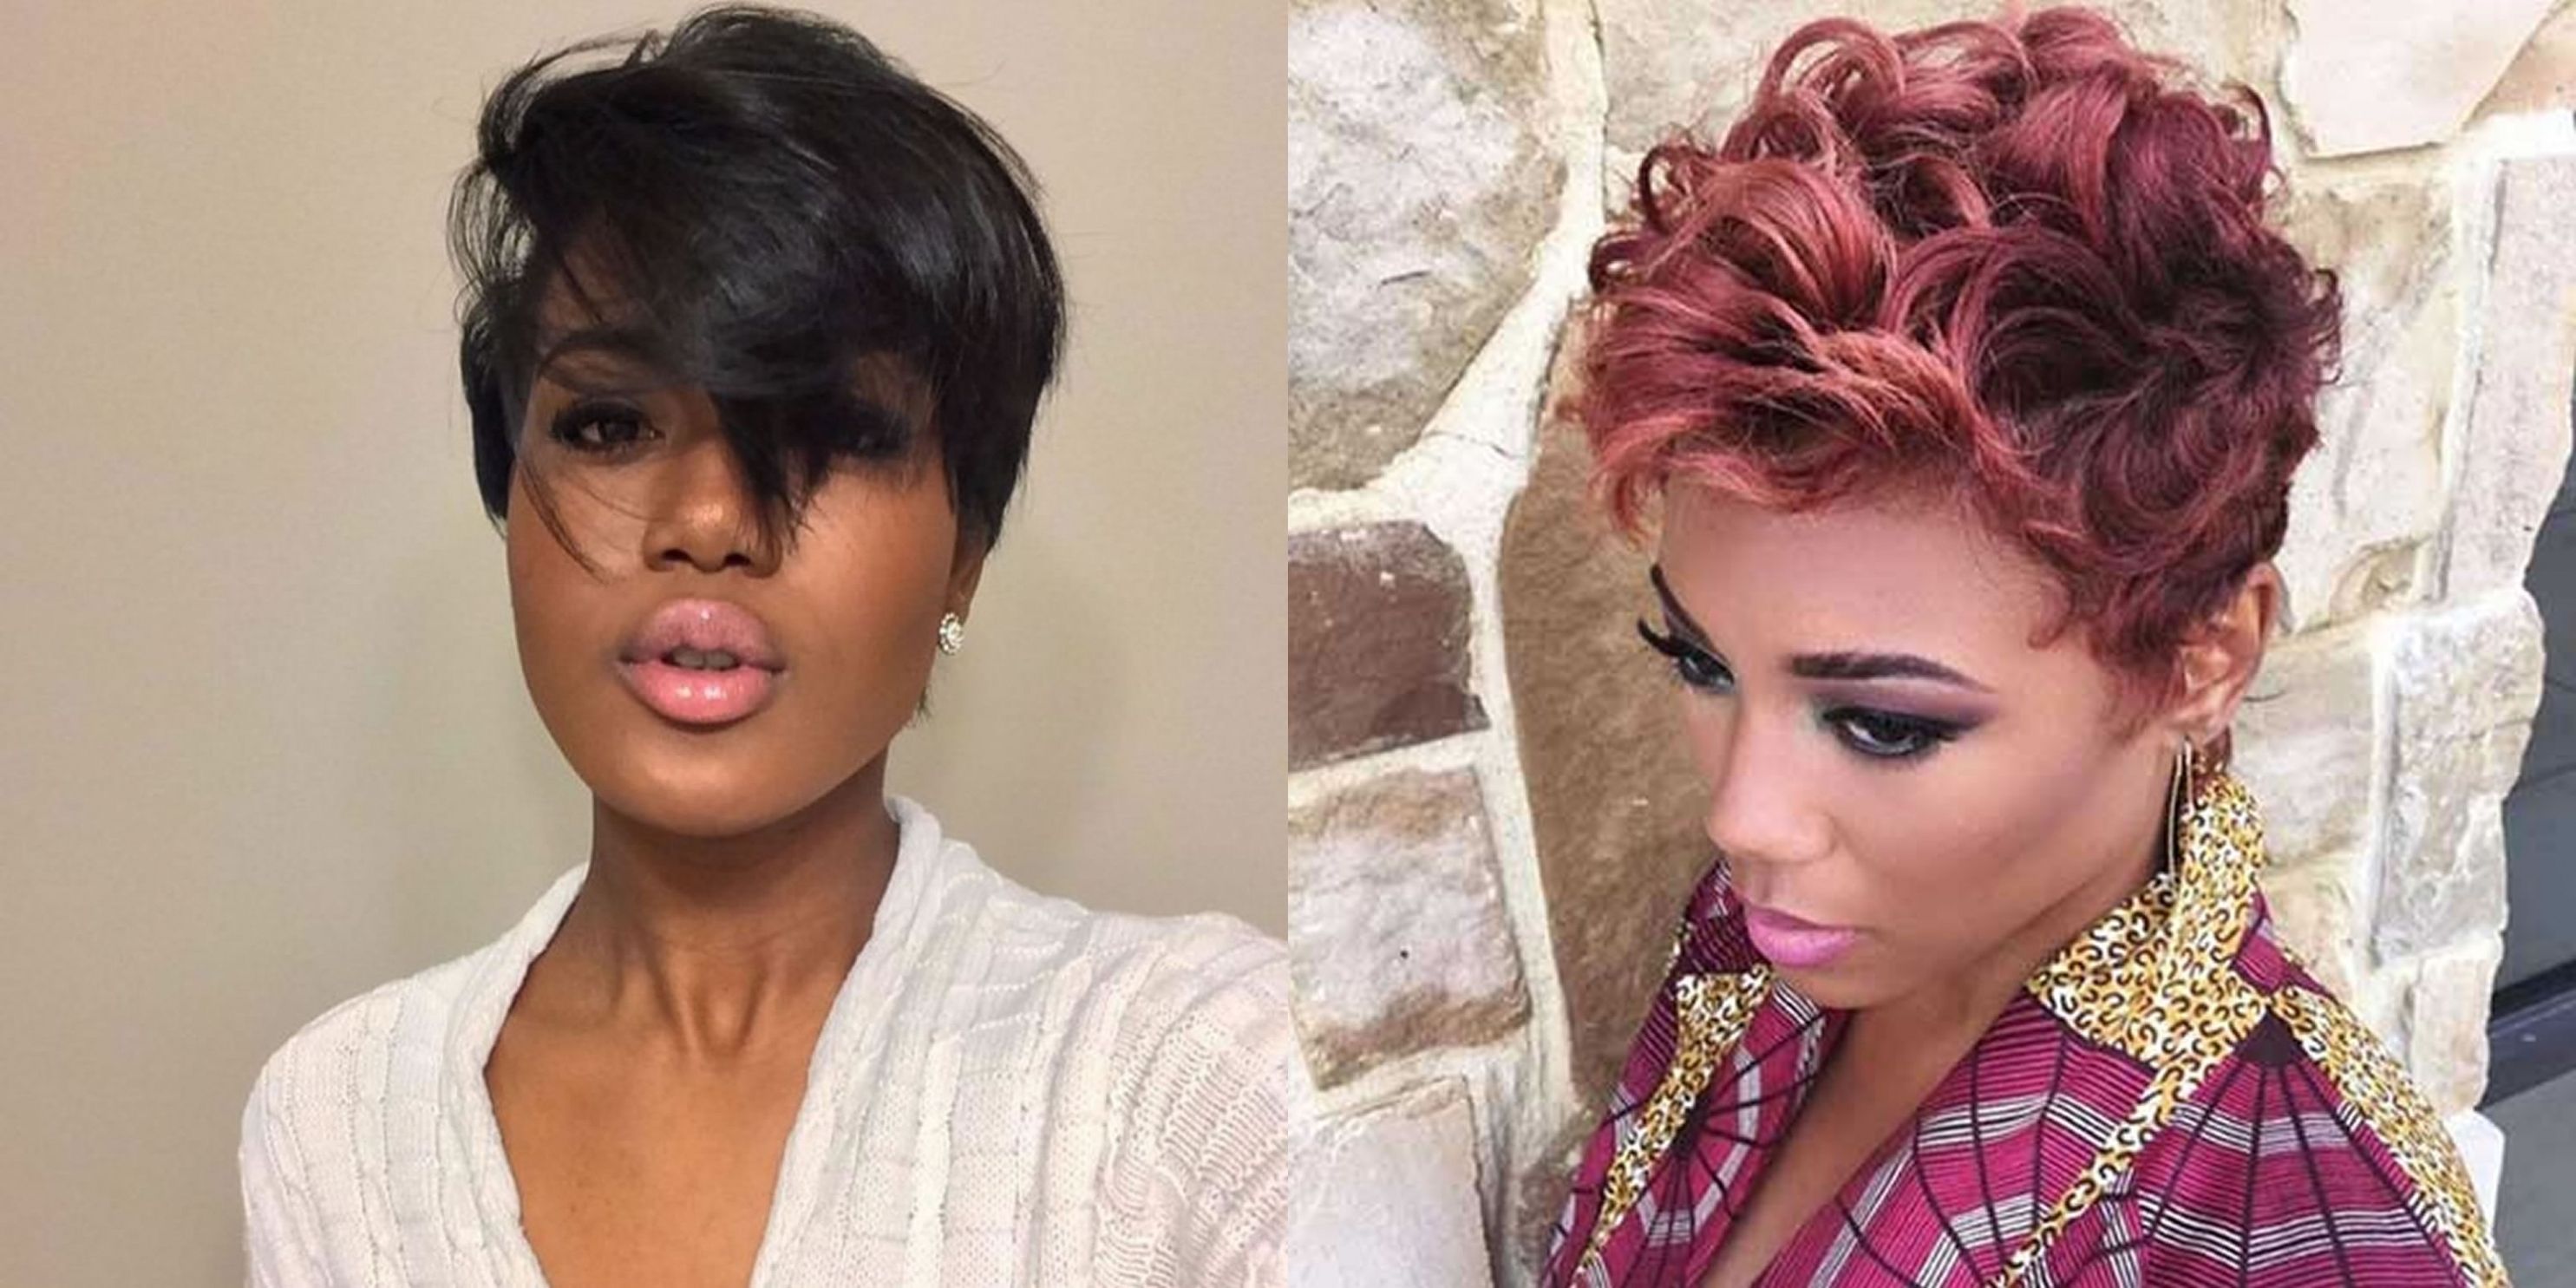 Hairstyles ~ Pixie Hairstyles For Black Women 60 Cool Short Throughout Latest Pixie Hairstyles For Black Women (View 5 of 15)